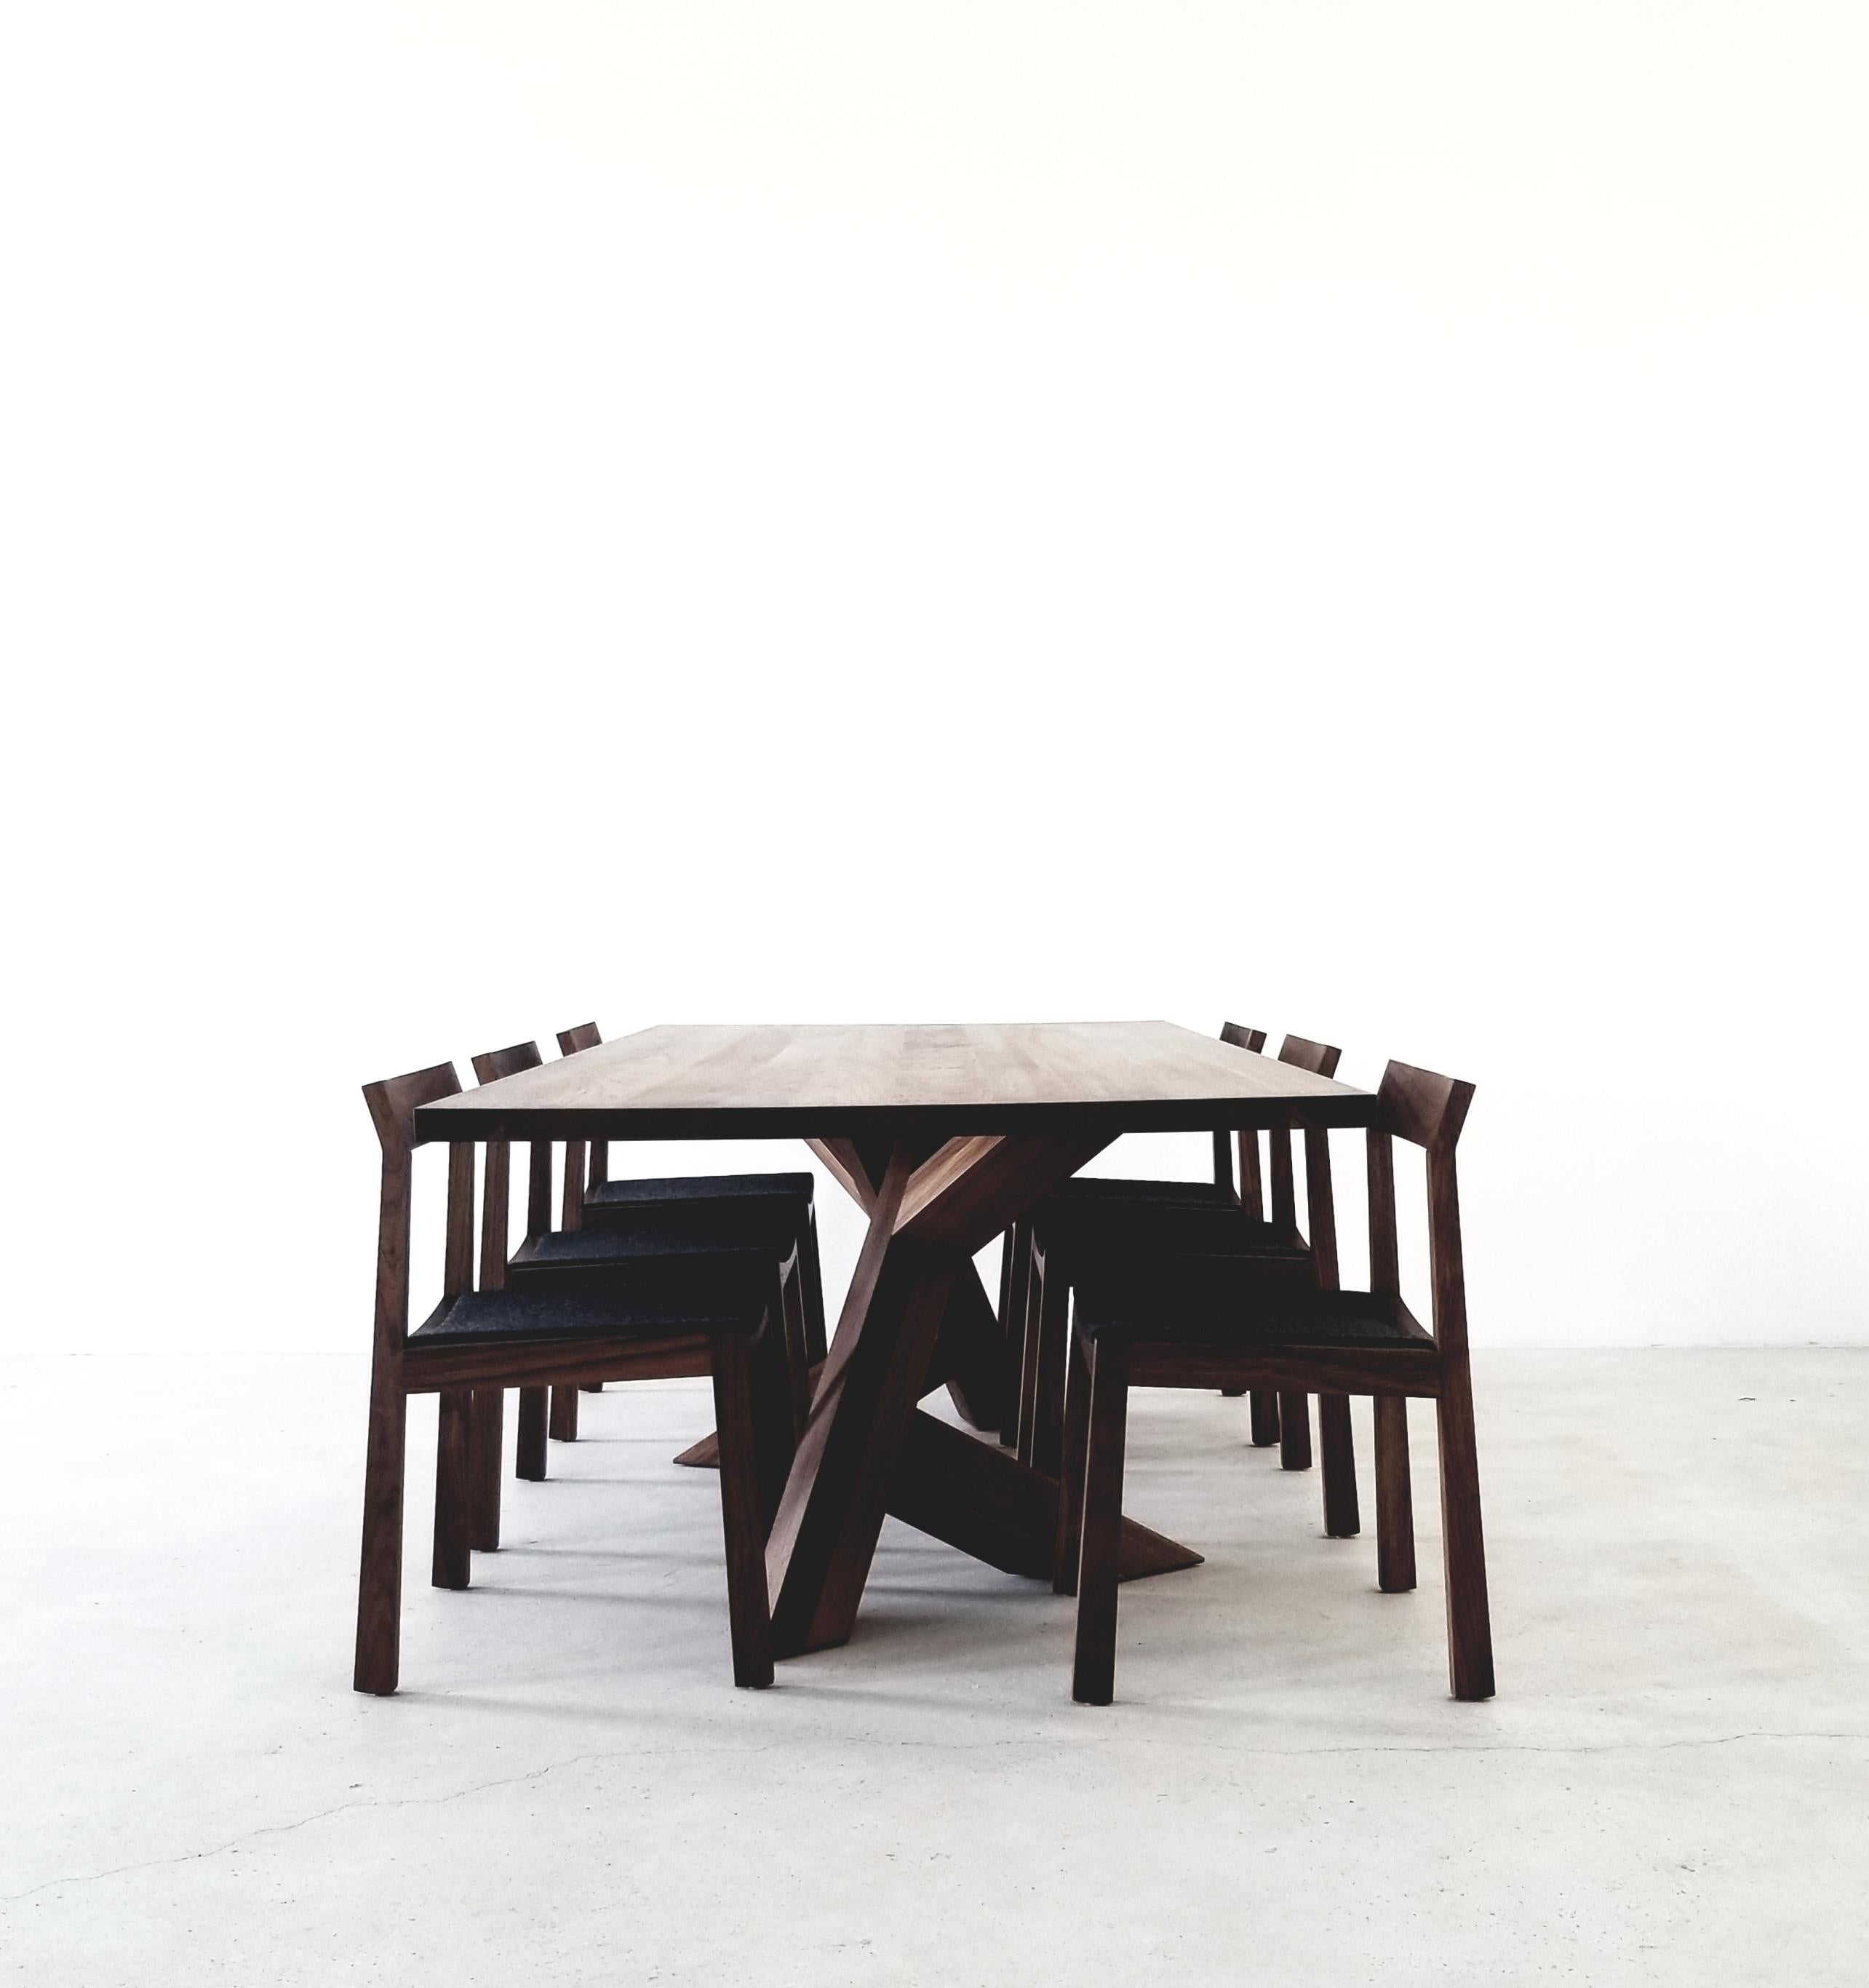 Iconoclast Modern Hardwood Dining Table by Izm In New Condition For Sale In Edmonton, Alberta